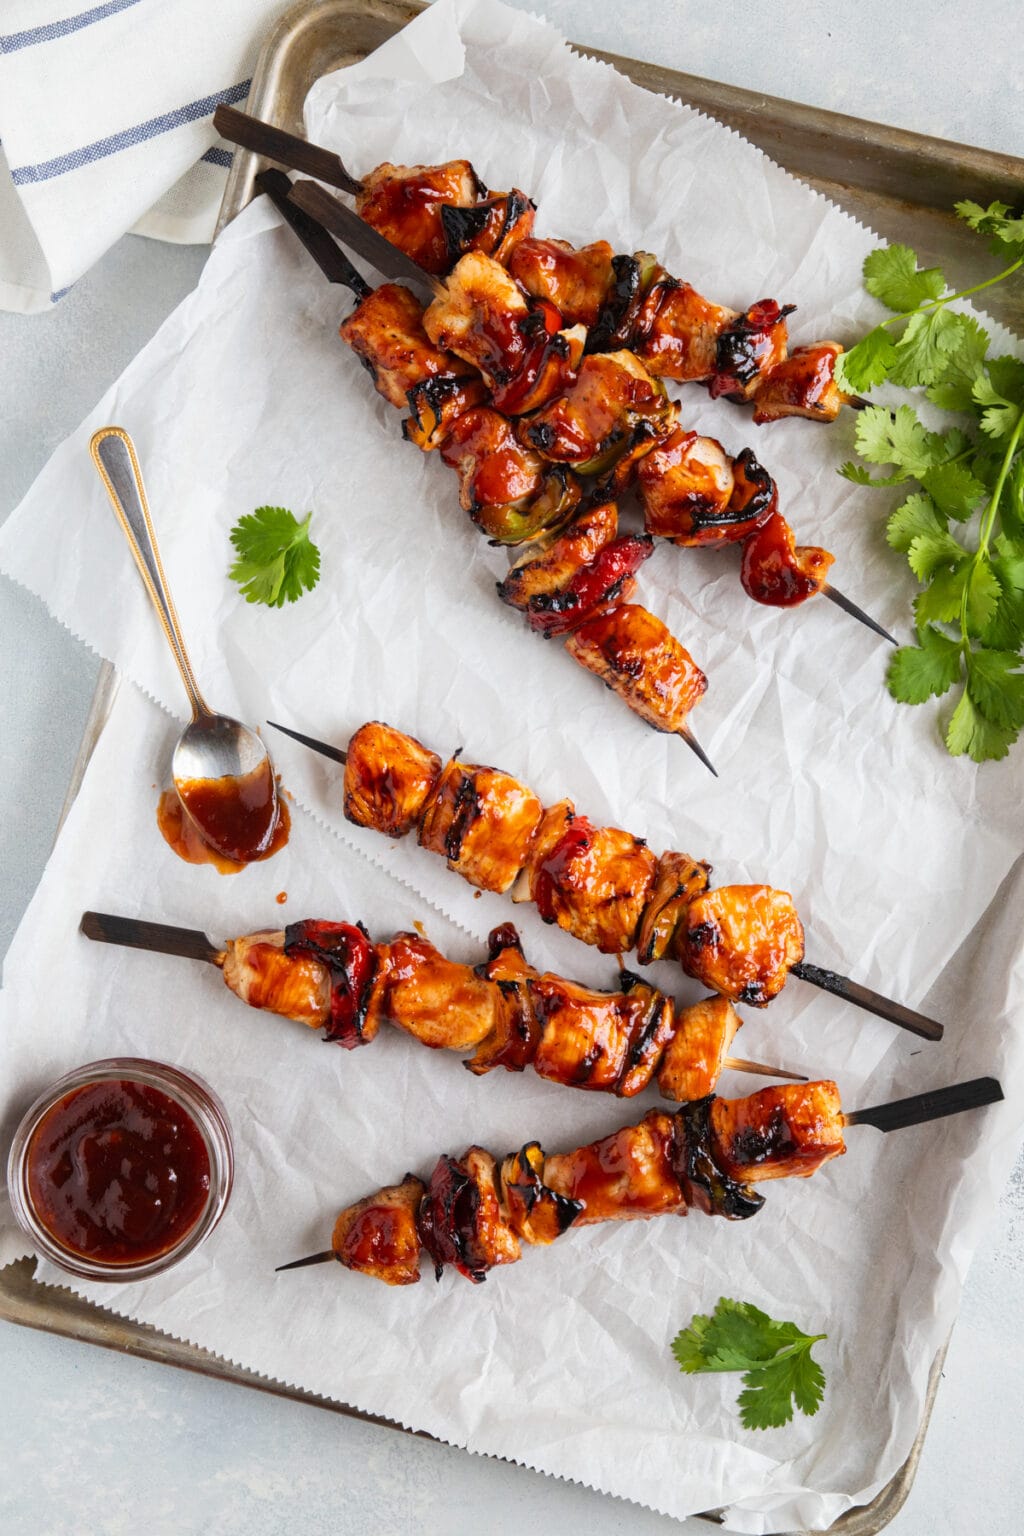 Grilled Chicken Skewers with Guava BBQ Sauce - My Dominican Kitchen